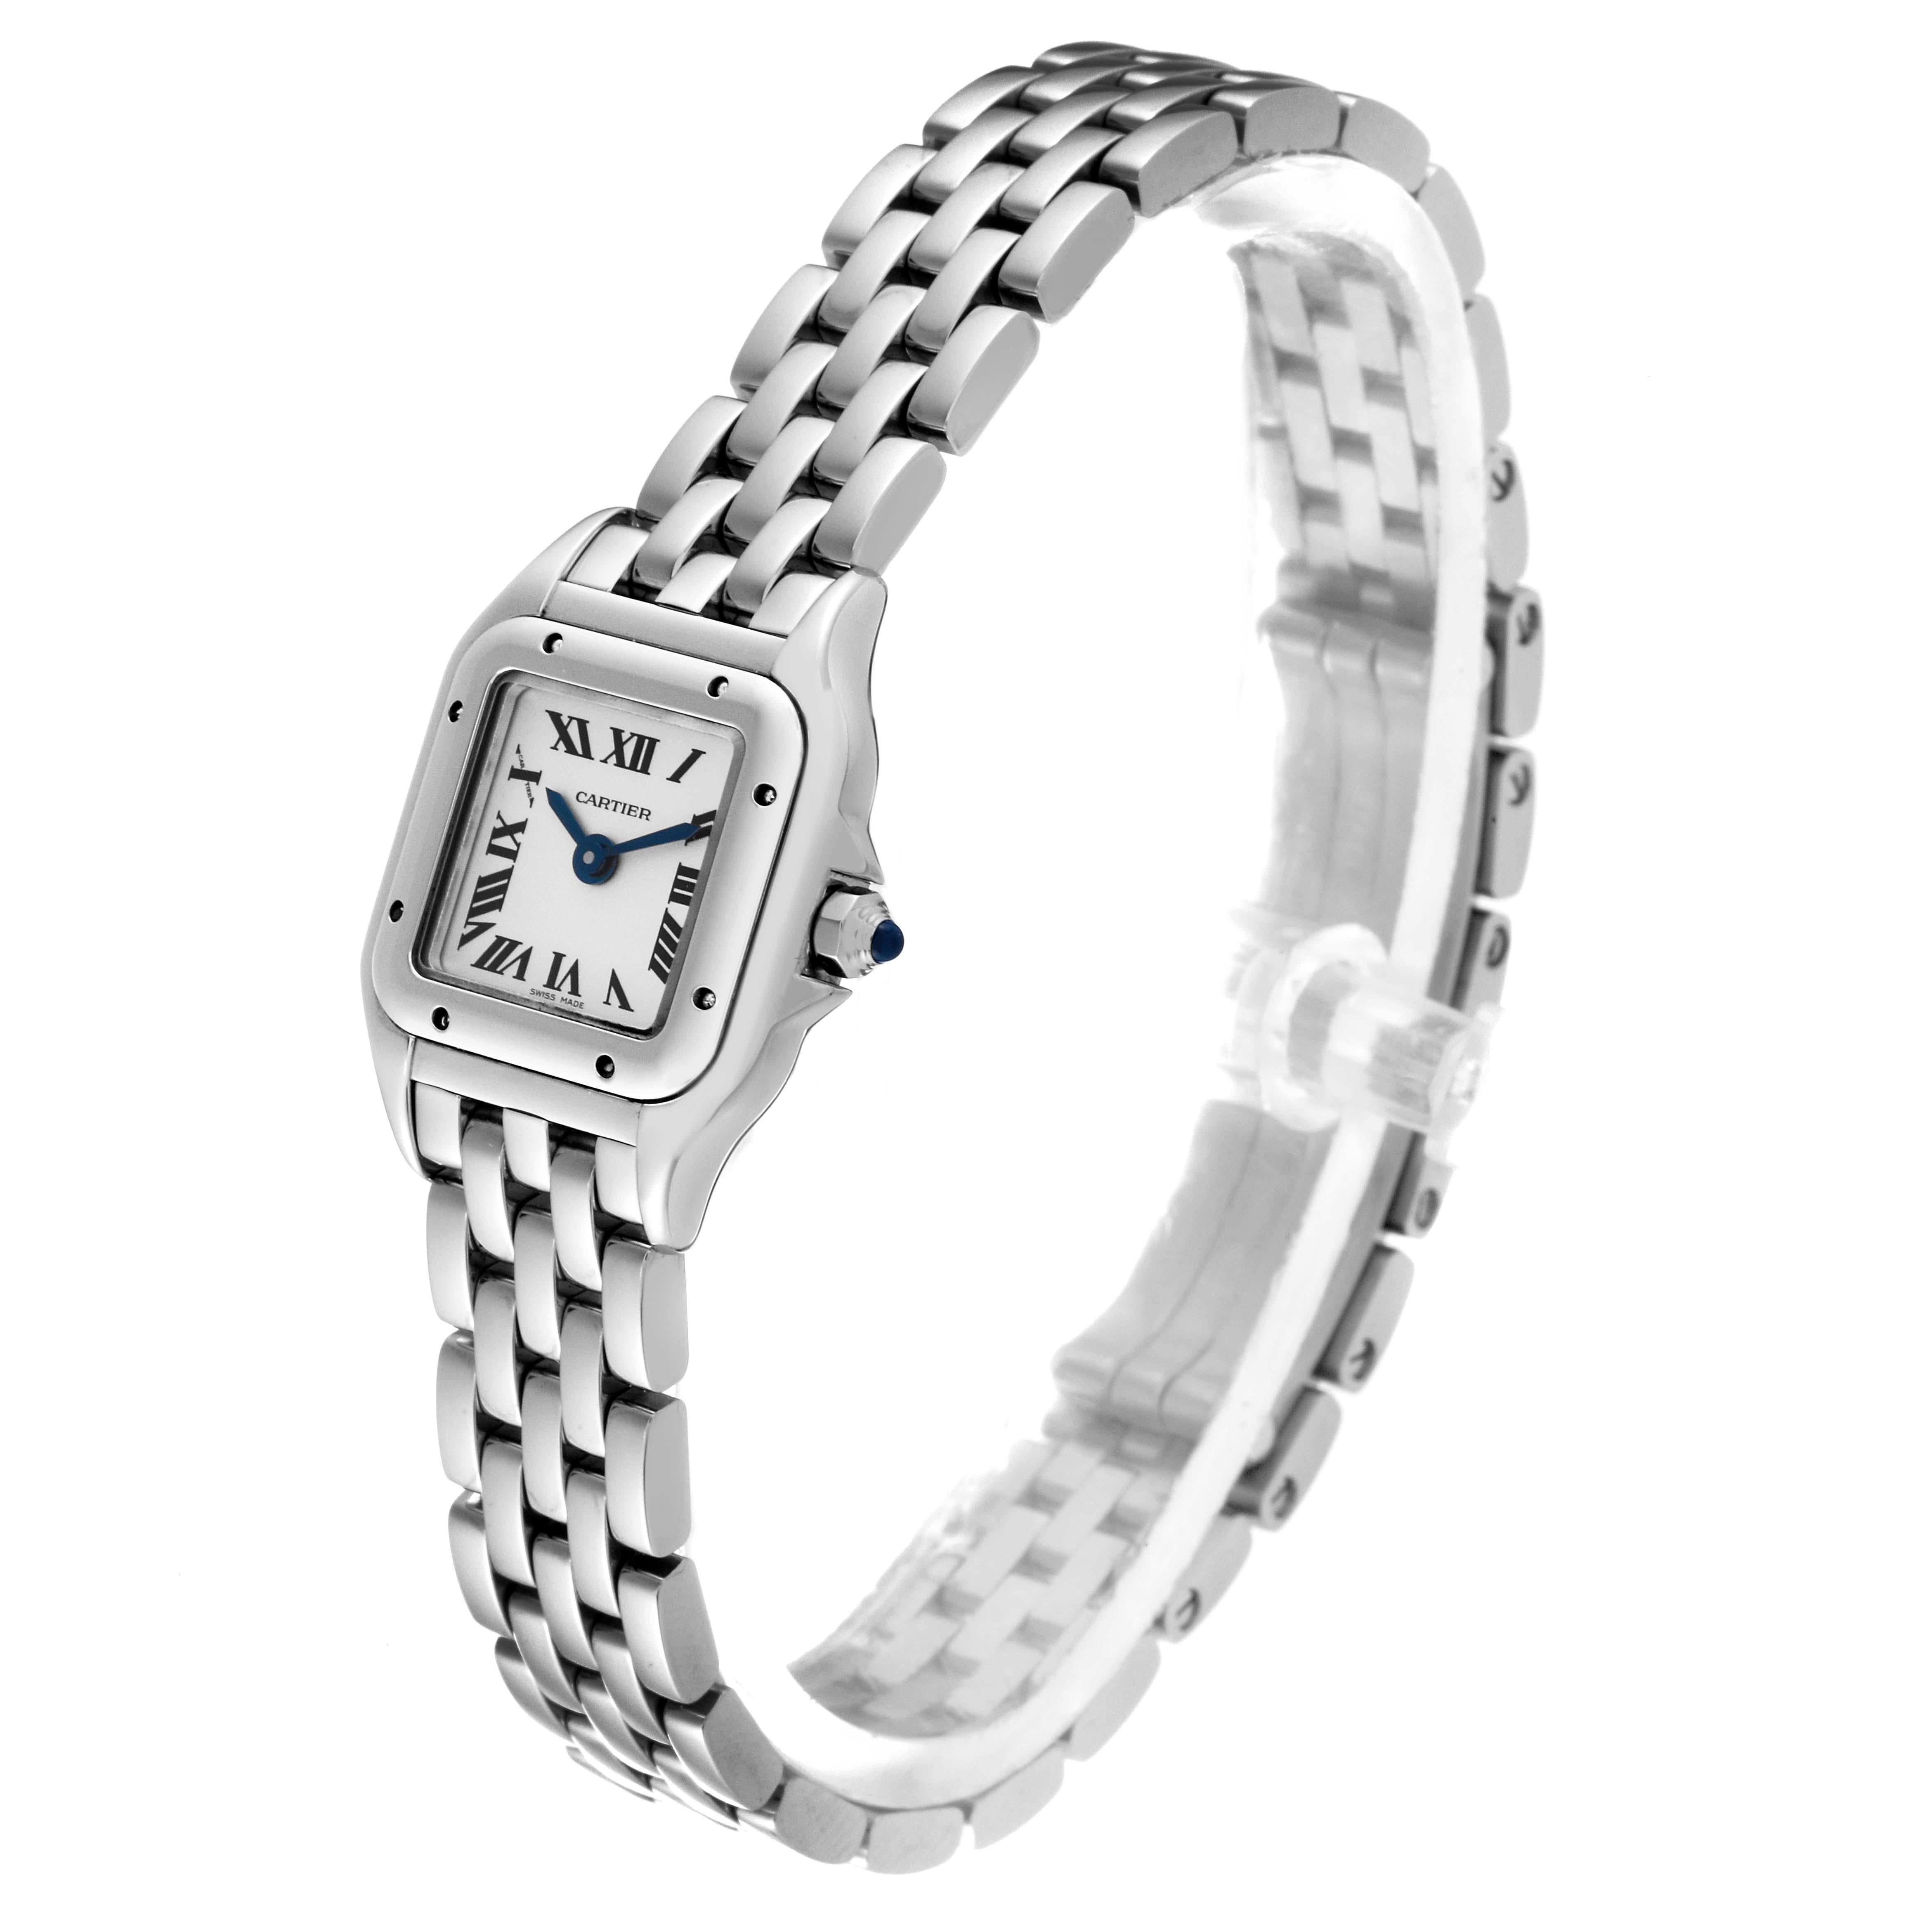 Cartier Panthere Mini Stainless Steel Ladies Watch WSPN0019 Unworn For Sale 4